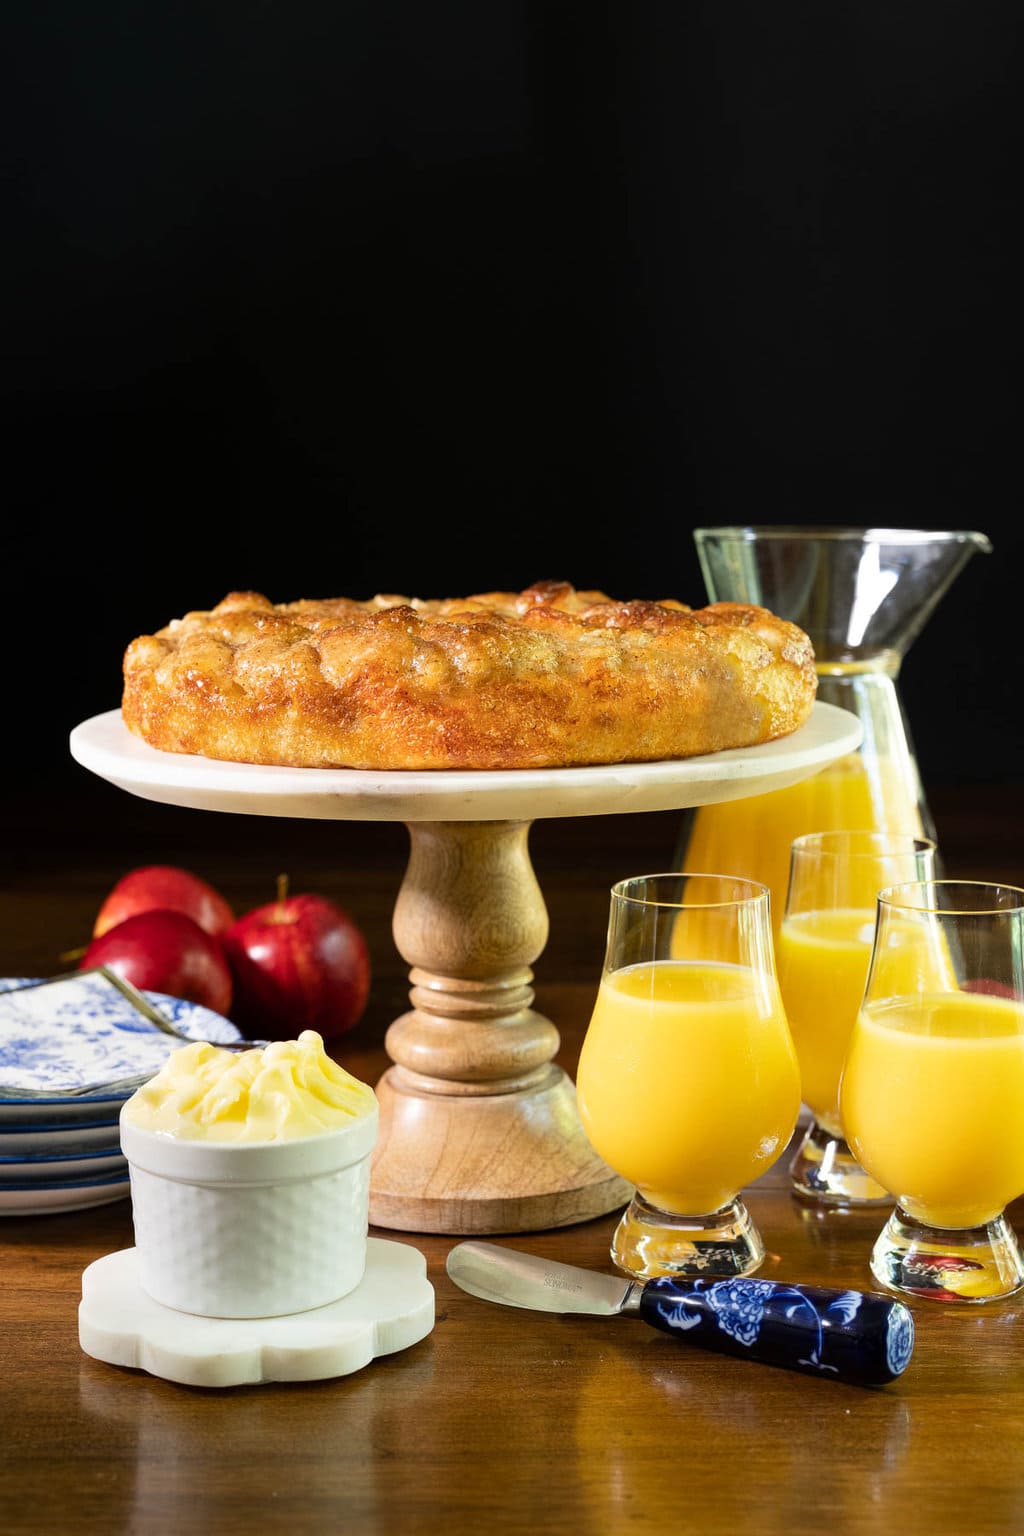 Vertical photo of a Ridiculously Easy Apple Cinnamon Breakfast Focaccia on a pedestal serving plate surrounded by fresh apples and cups of orange juice.